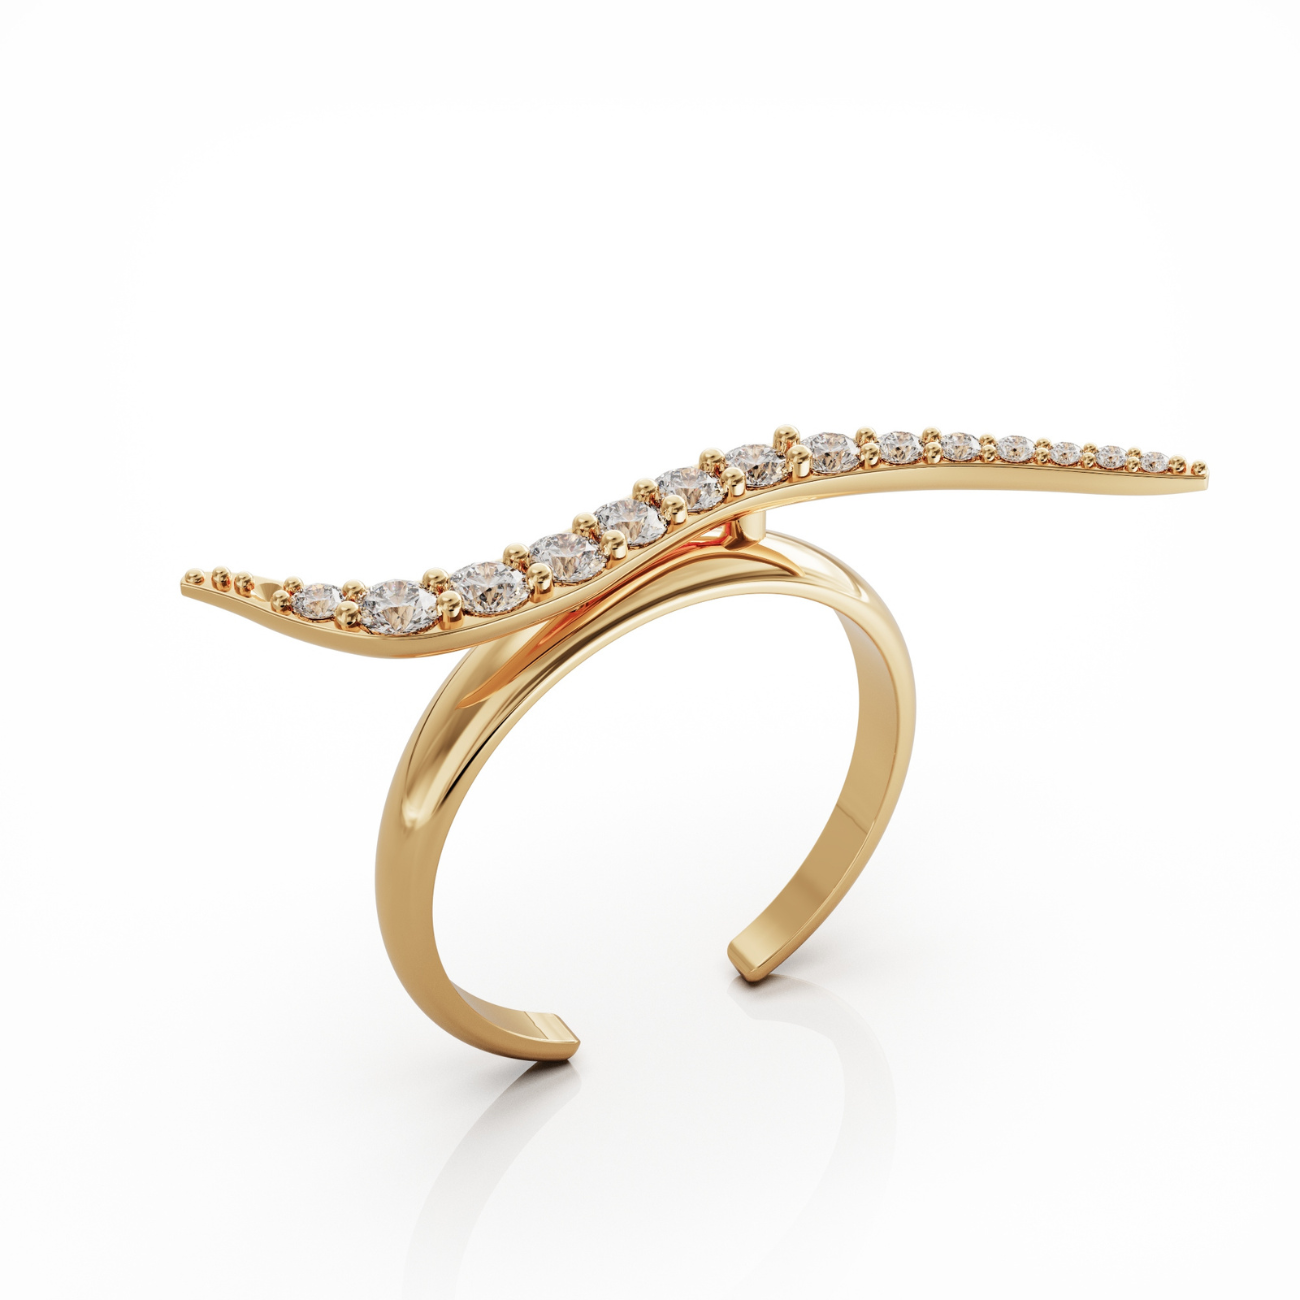 Swirl ring 18k gold with clear cz